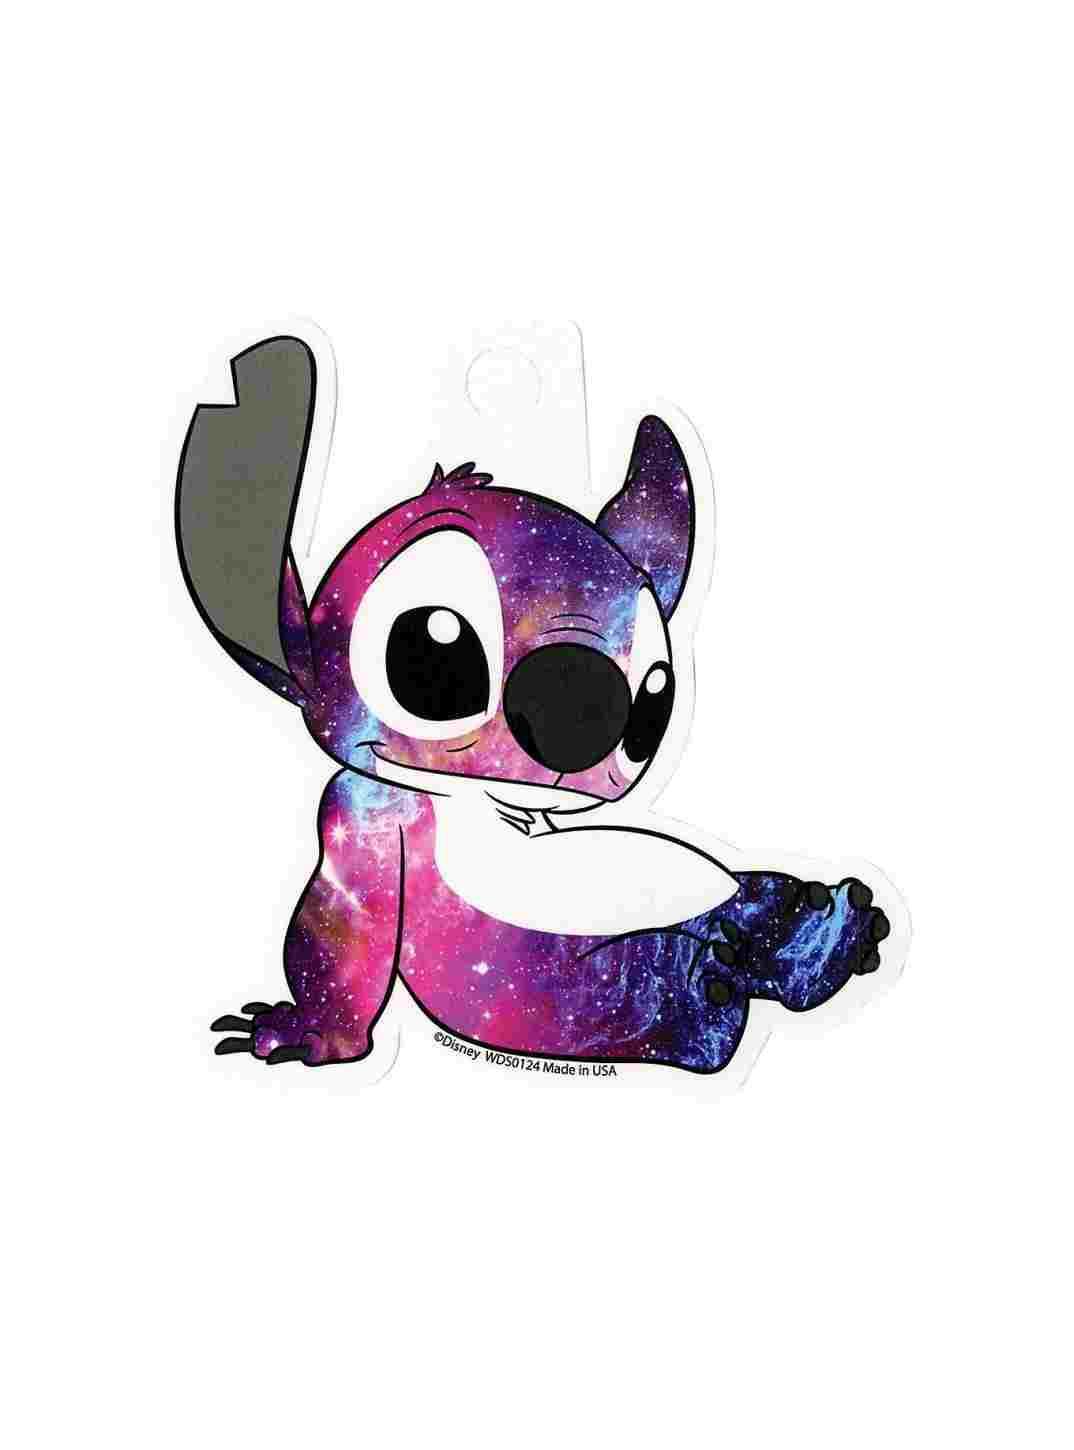 1074 x 1450 · jpeg - Cute Baby Stitch Wallpapers - Top Free Cute Baby Stitch Backgrounds ...